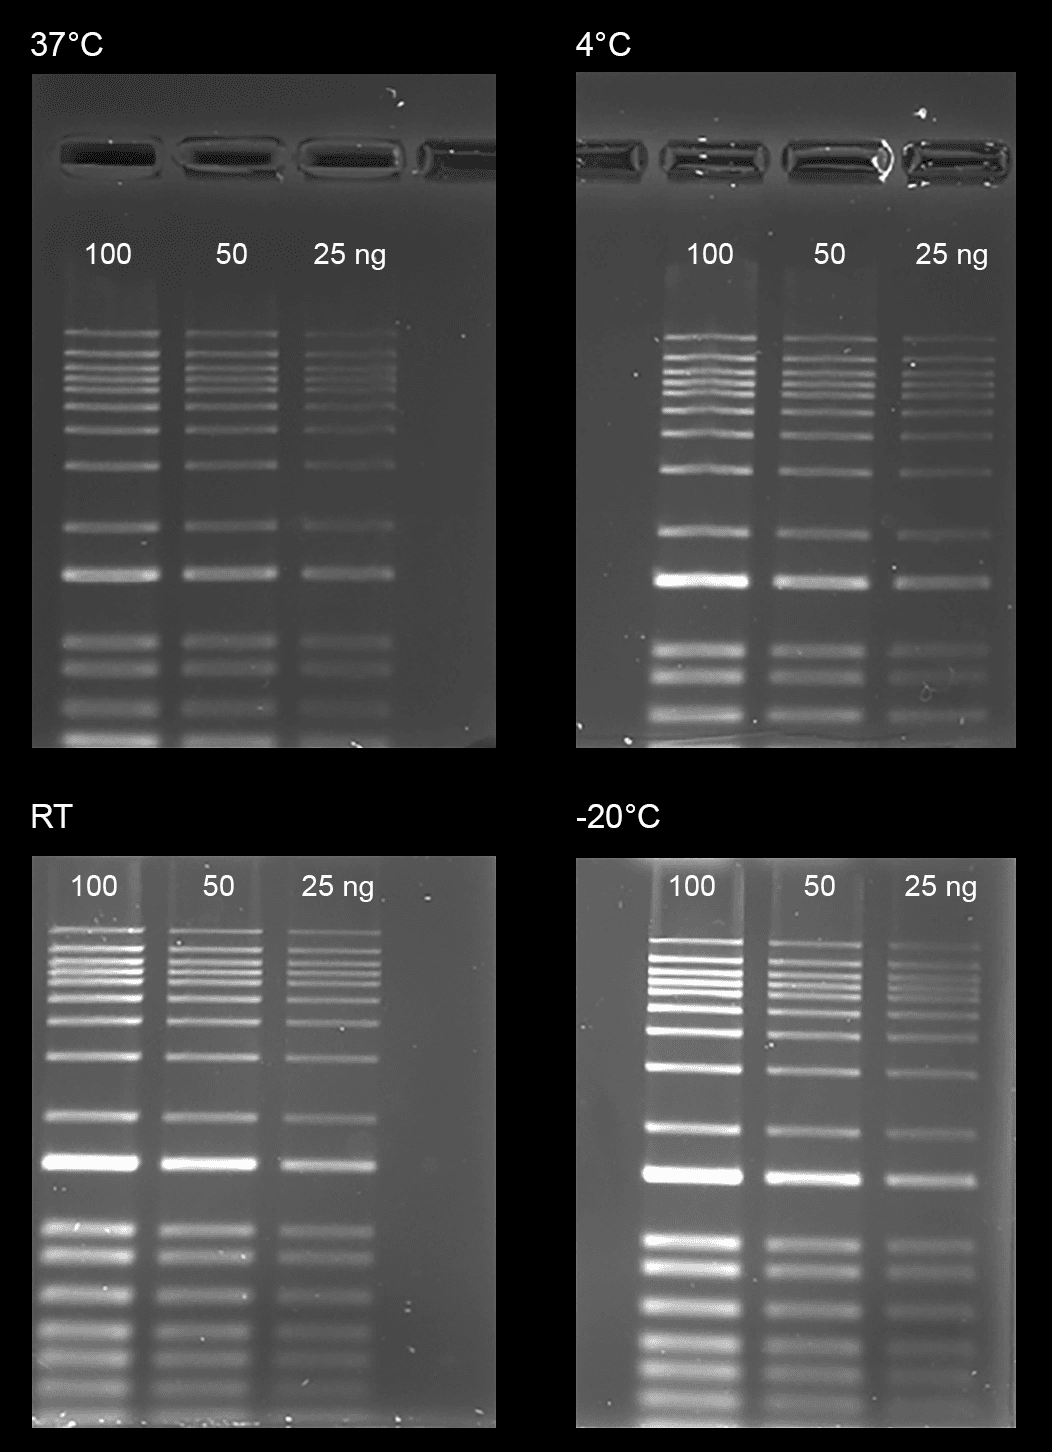 Stability test on Gelite™ Safe DNA Gel Stain, which was dissolved in water and stored at four different temperatures (-20°C, 4°C, room temperature, and 37°C) for a period of three months. After storage, DNA ladders (100, 50, and 25 ng) were loaded in 1% agarose gel for 60 minutes at 75 V. Gels were incubated with Gelite™ Safe DNA Gel Stain for 1 hour. The image was captured in SYBR green filter set (Exposure time= 1.5 sec).